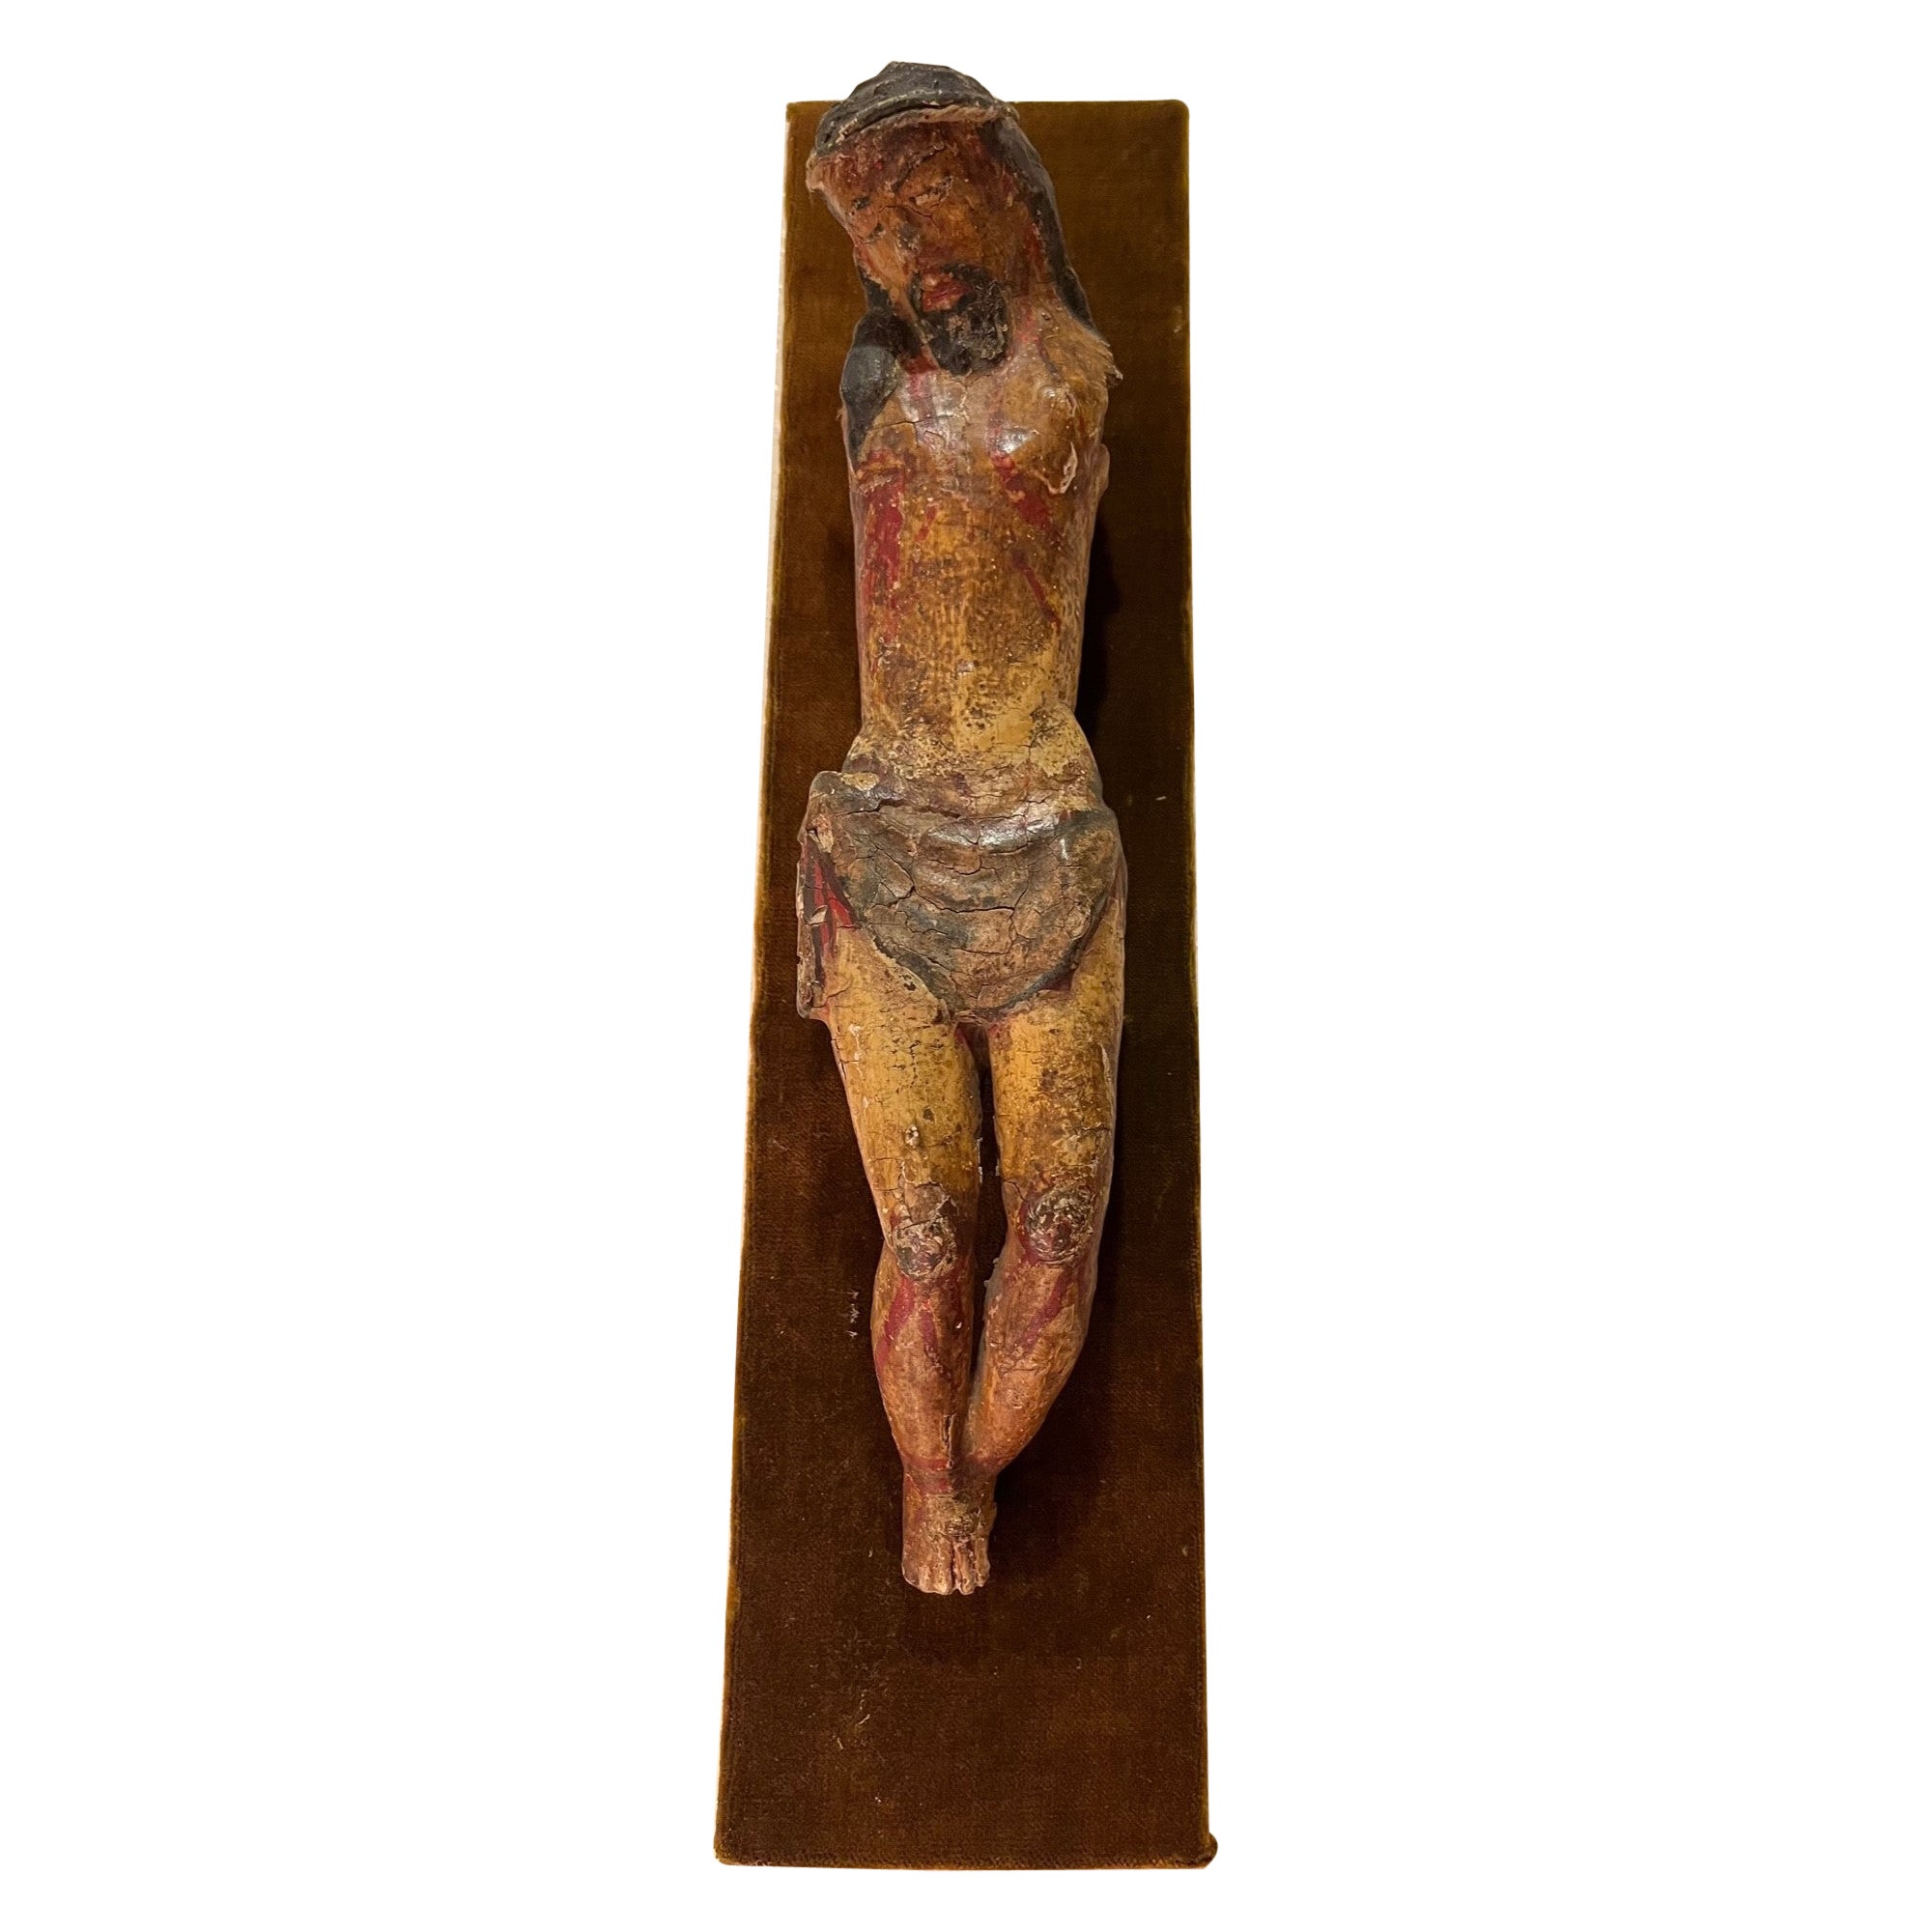  13th Century Period Wood Carved Polychrome Sculpture of Corpus Christi